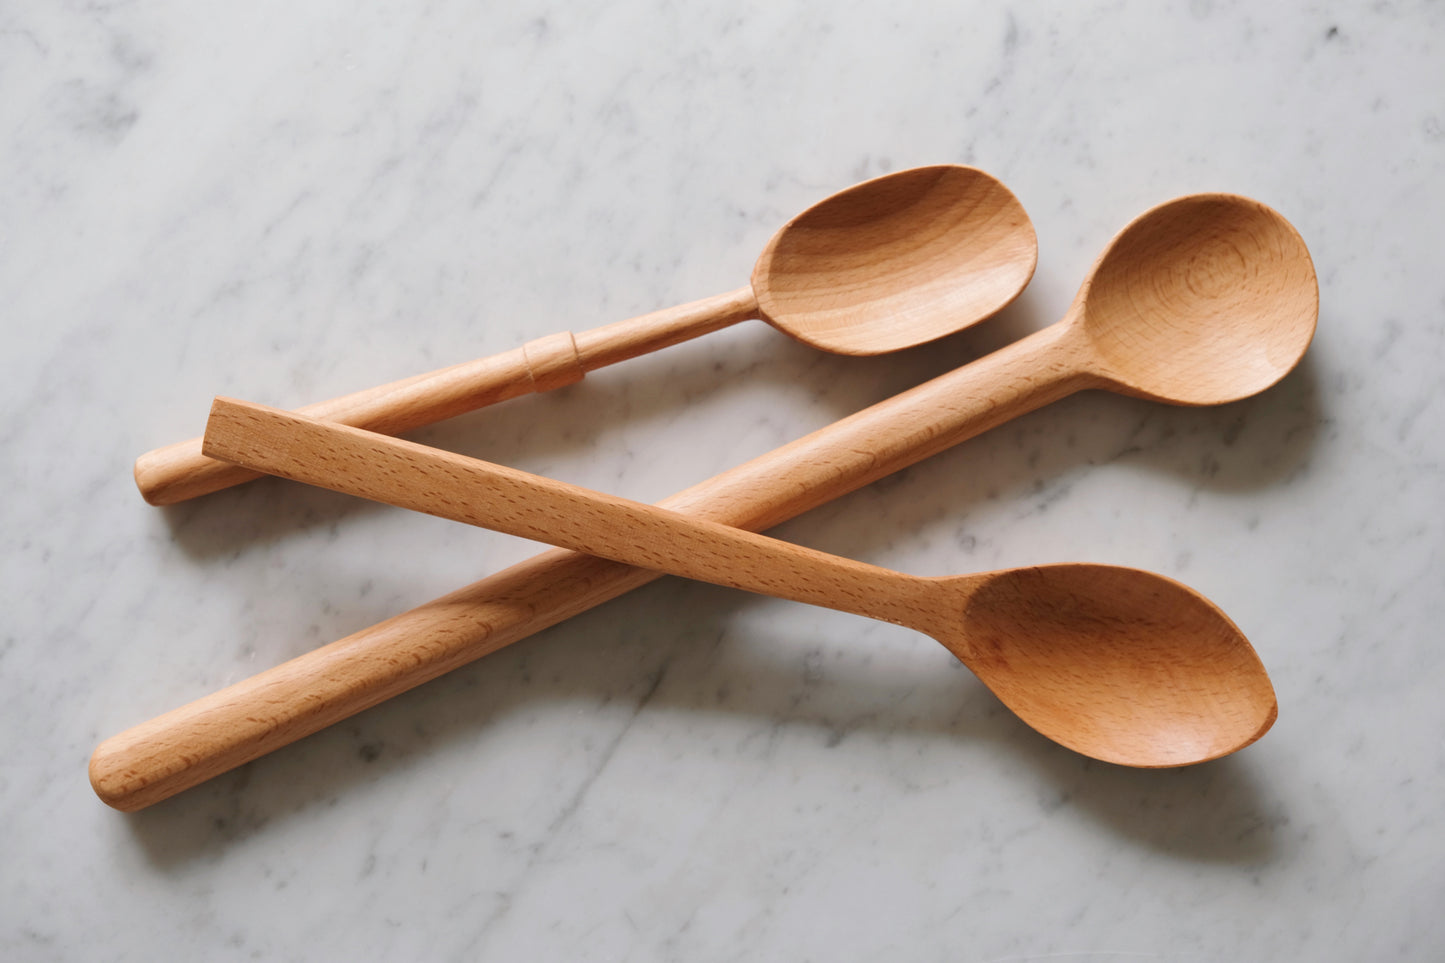 Large Wooden Cooking Spoon Sets